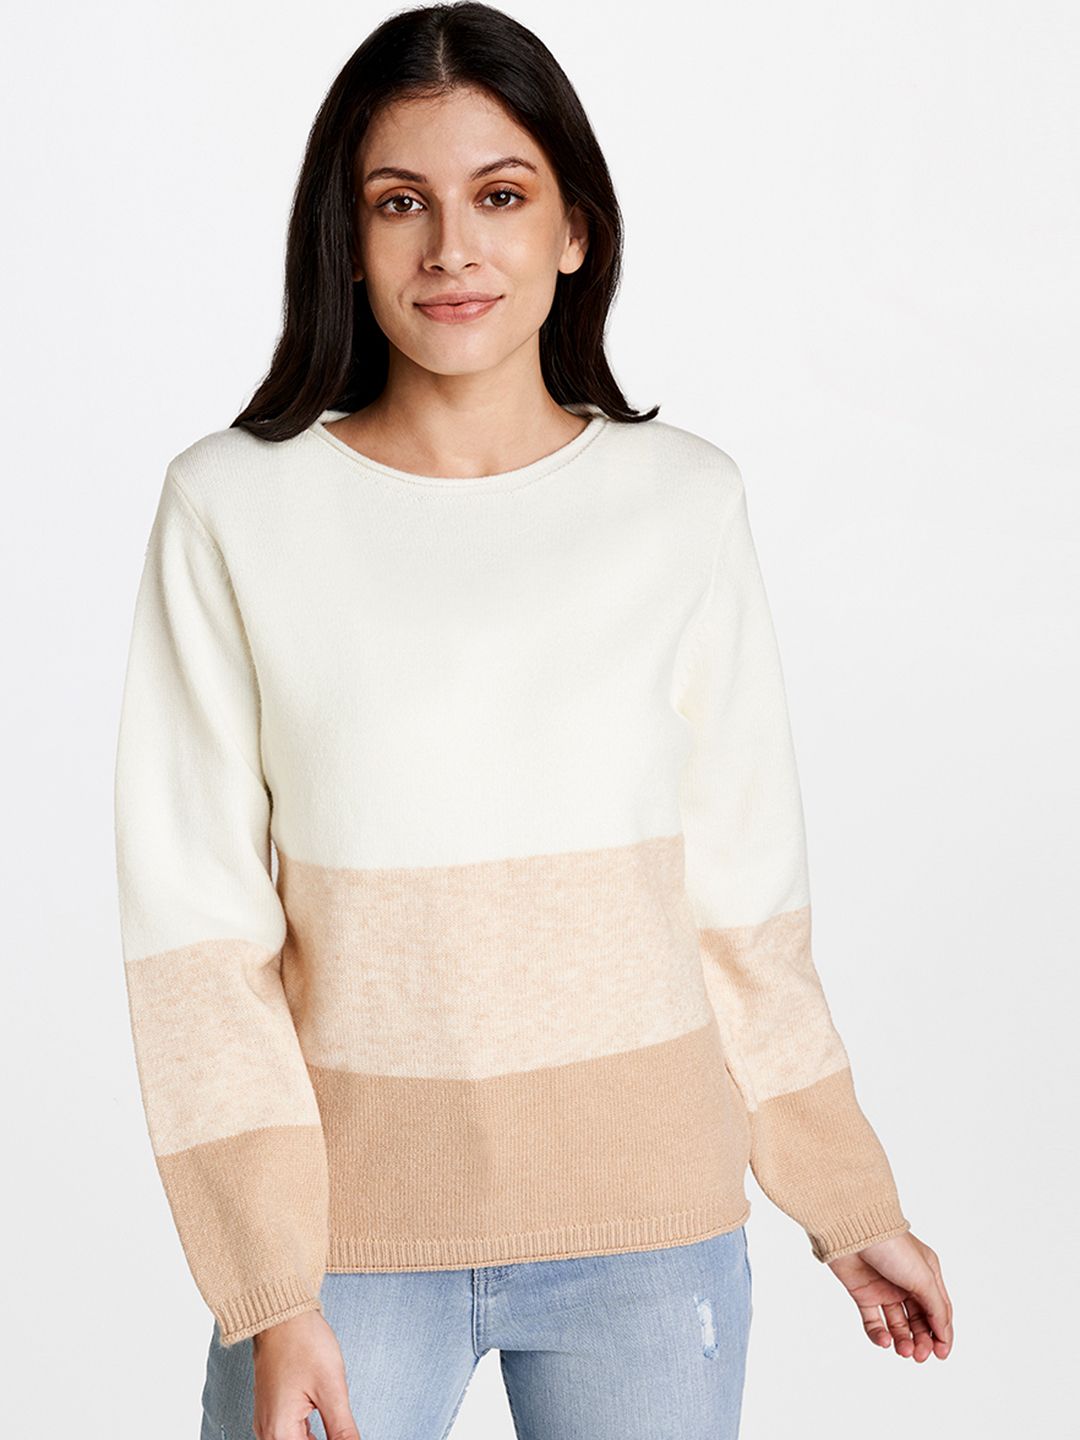 AND Women Off White & Beige Colourblocked Pullover Sweater Price in India